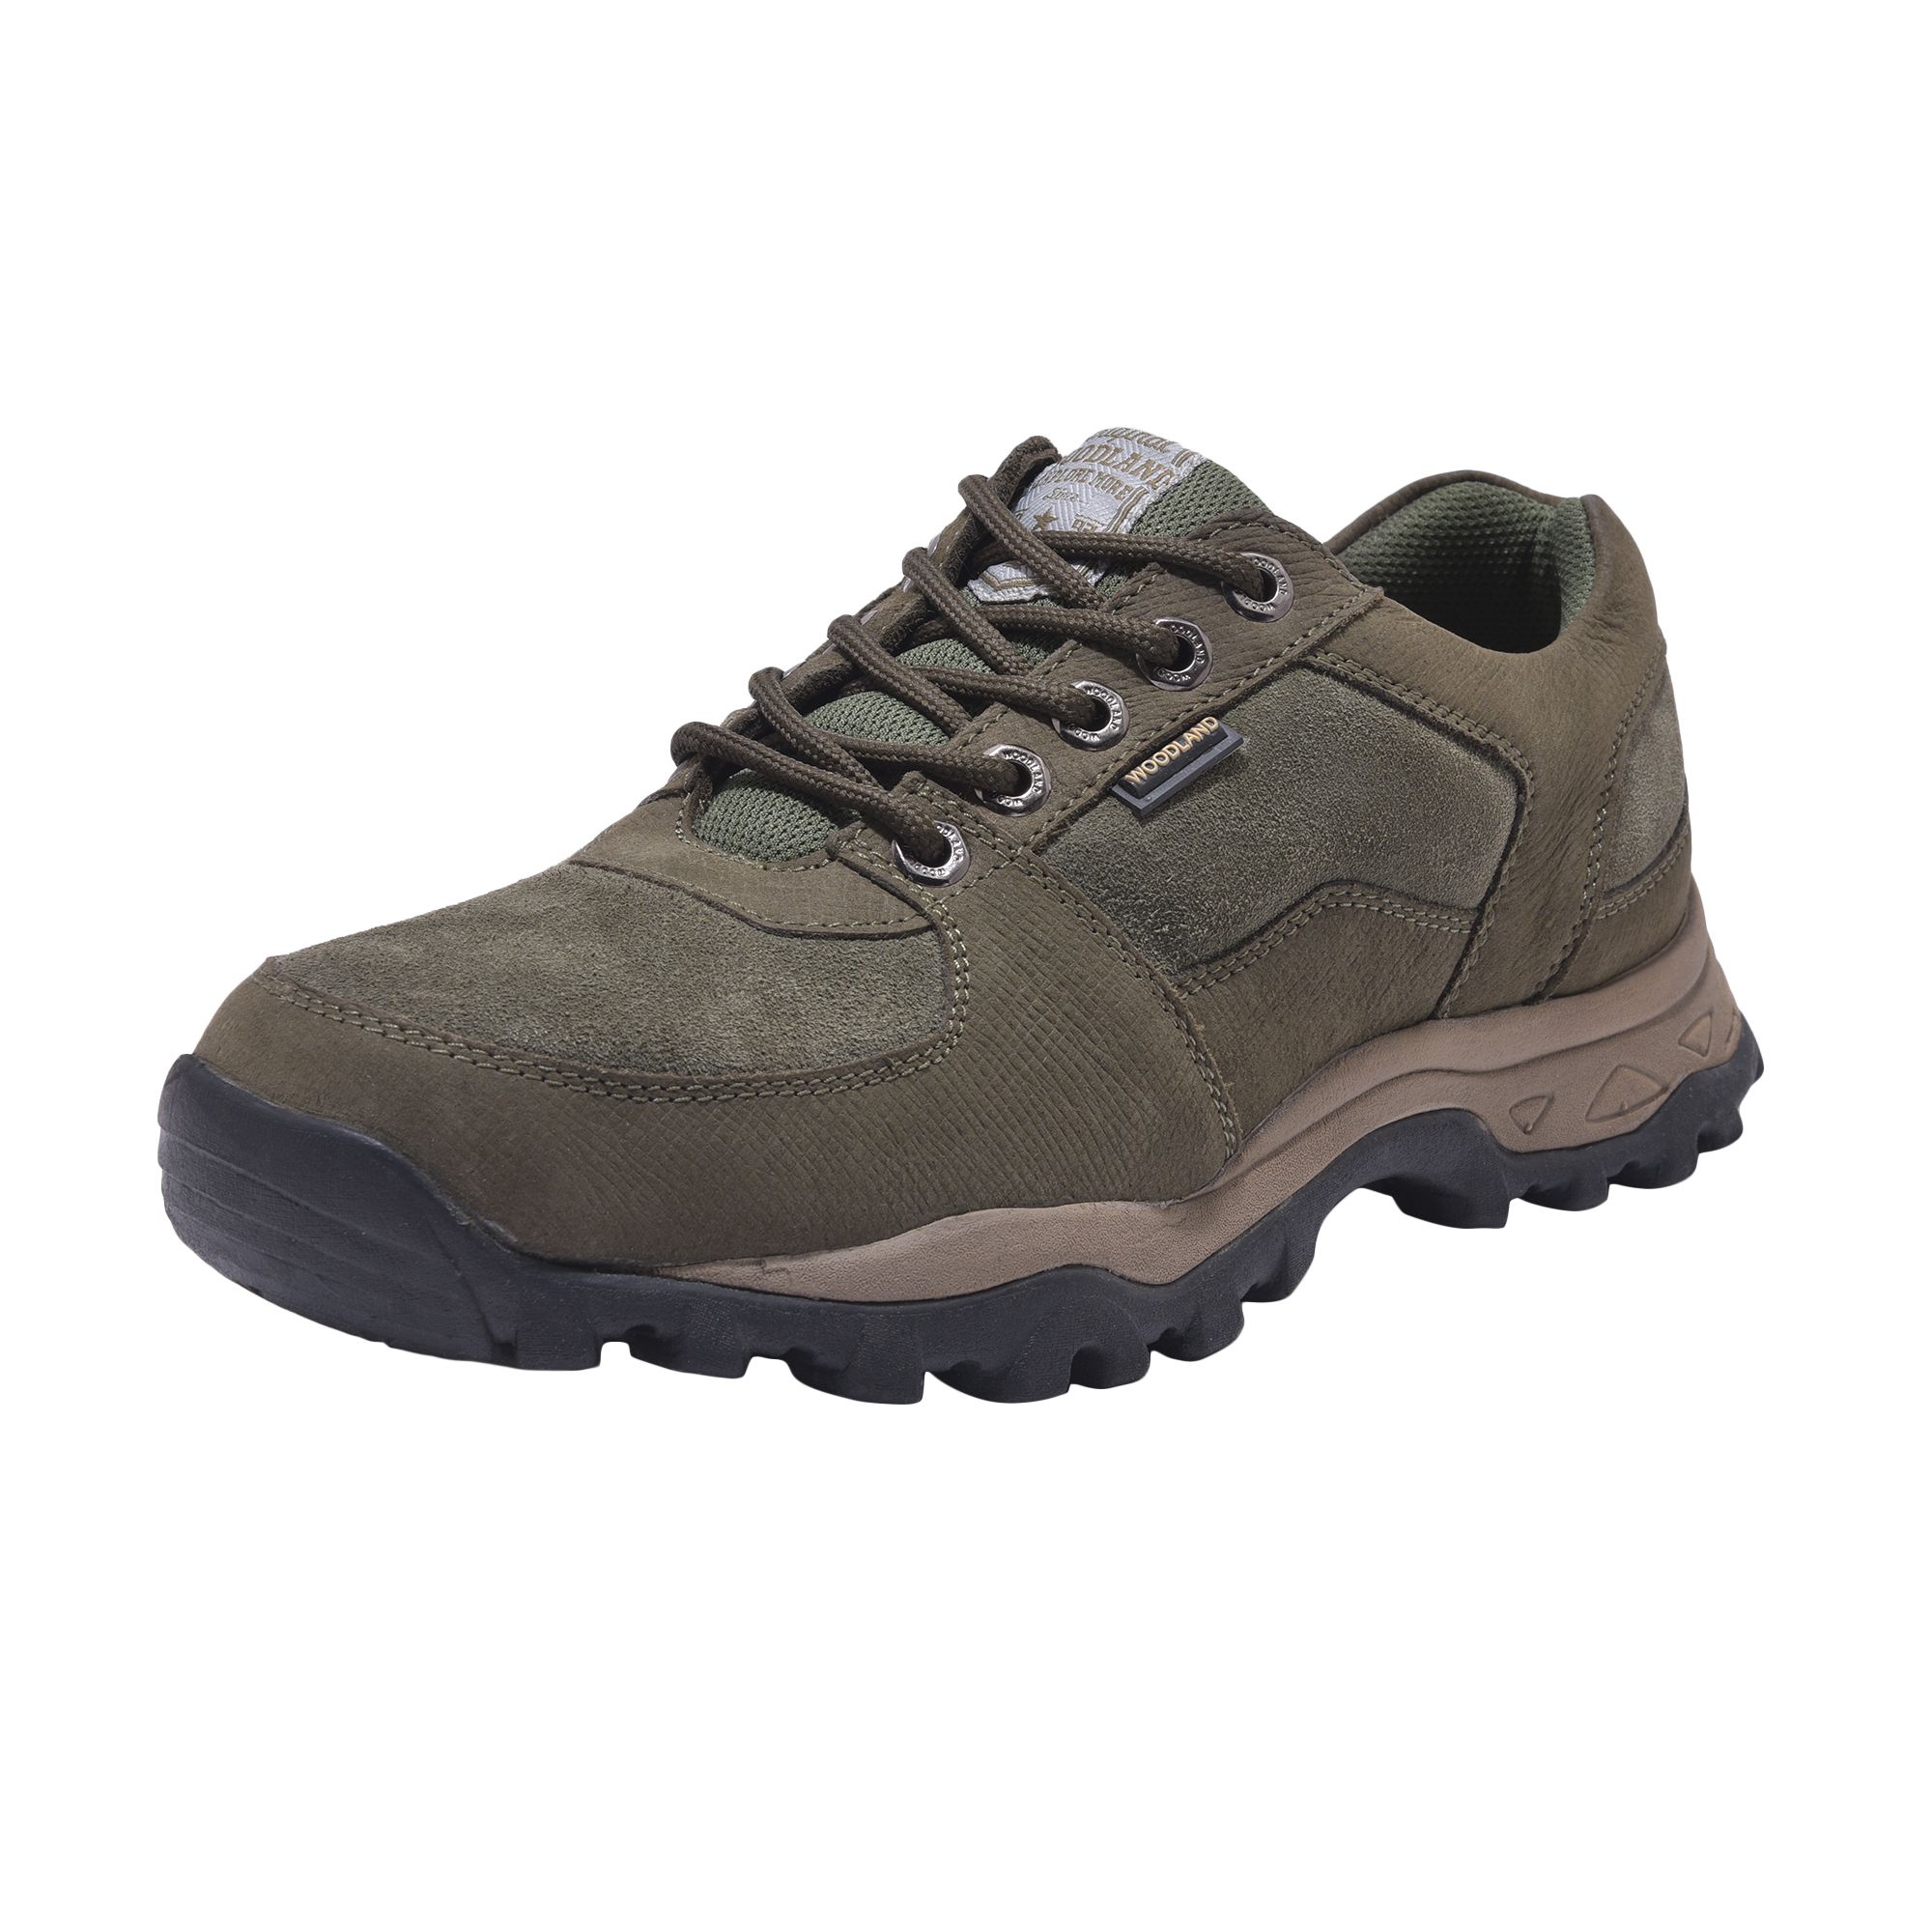 OLIVE GREEN casual shoe for men